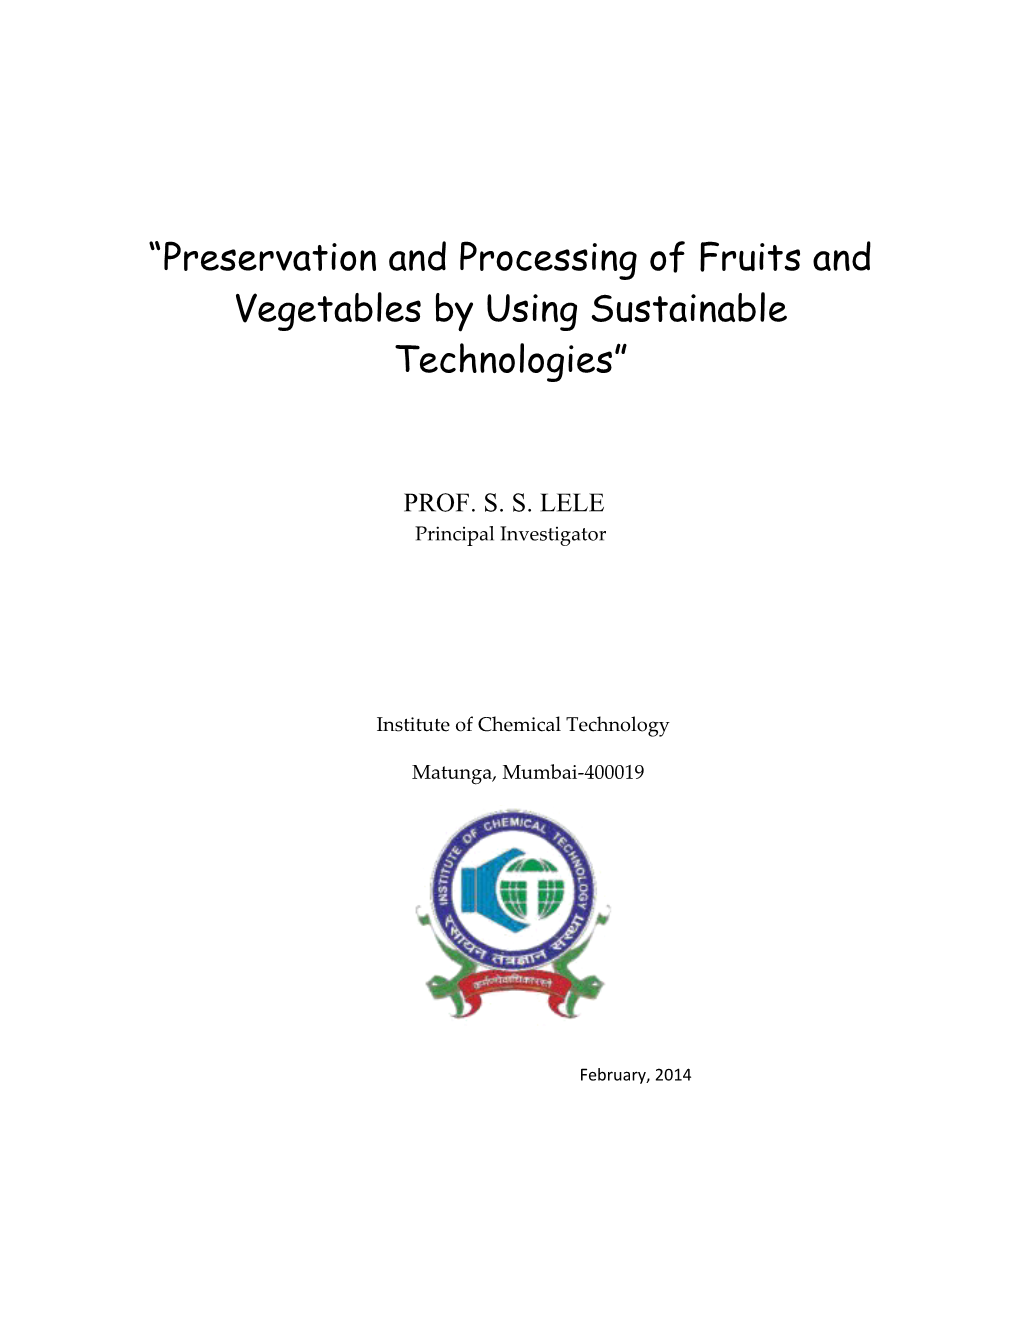 Preservation and Processing of Fruits and Vegetables by Using Sustainable Technologies